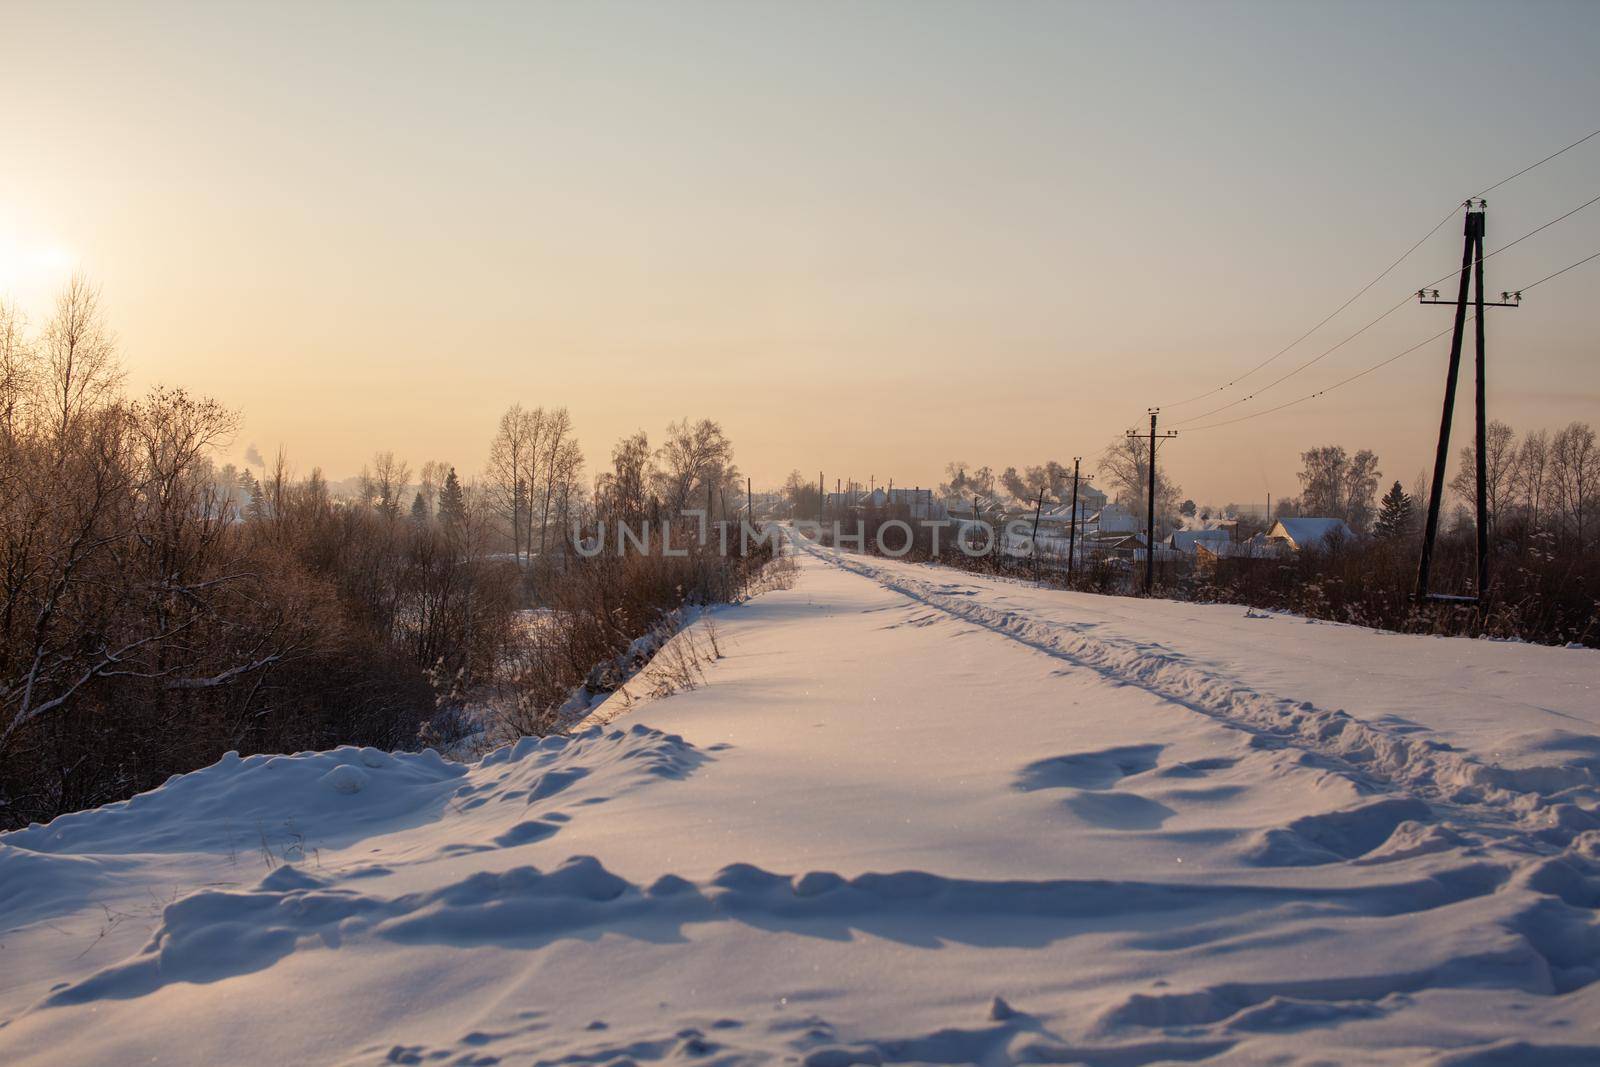 A snow-covered railway and a path trodden by people on it in winter. Lots of snow. Iron rails a track for a train in the direction of cargo covered with snow at a railway crossing in winter